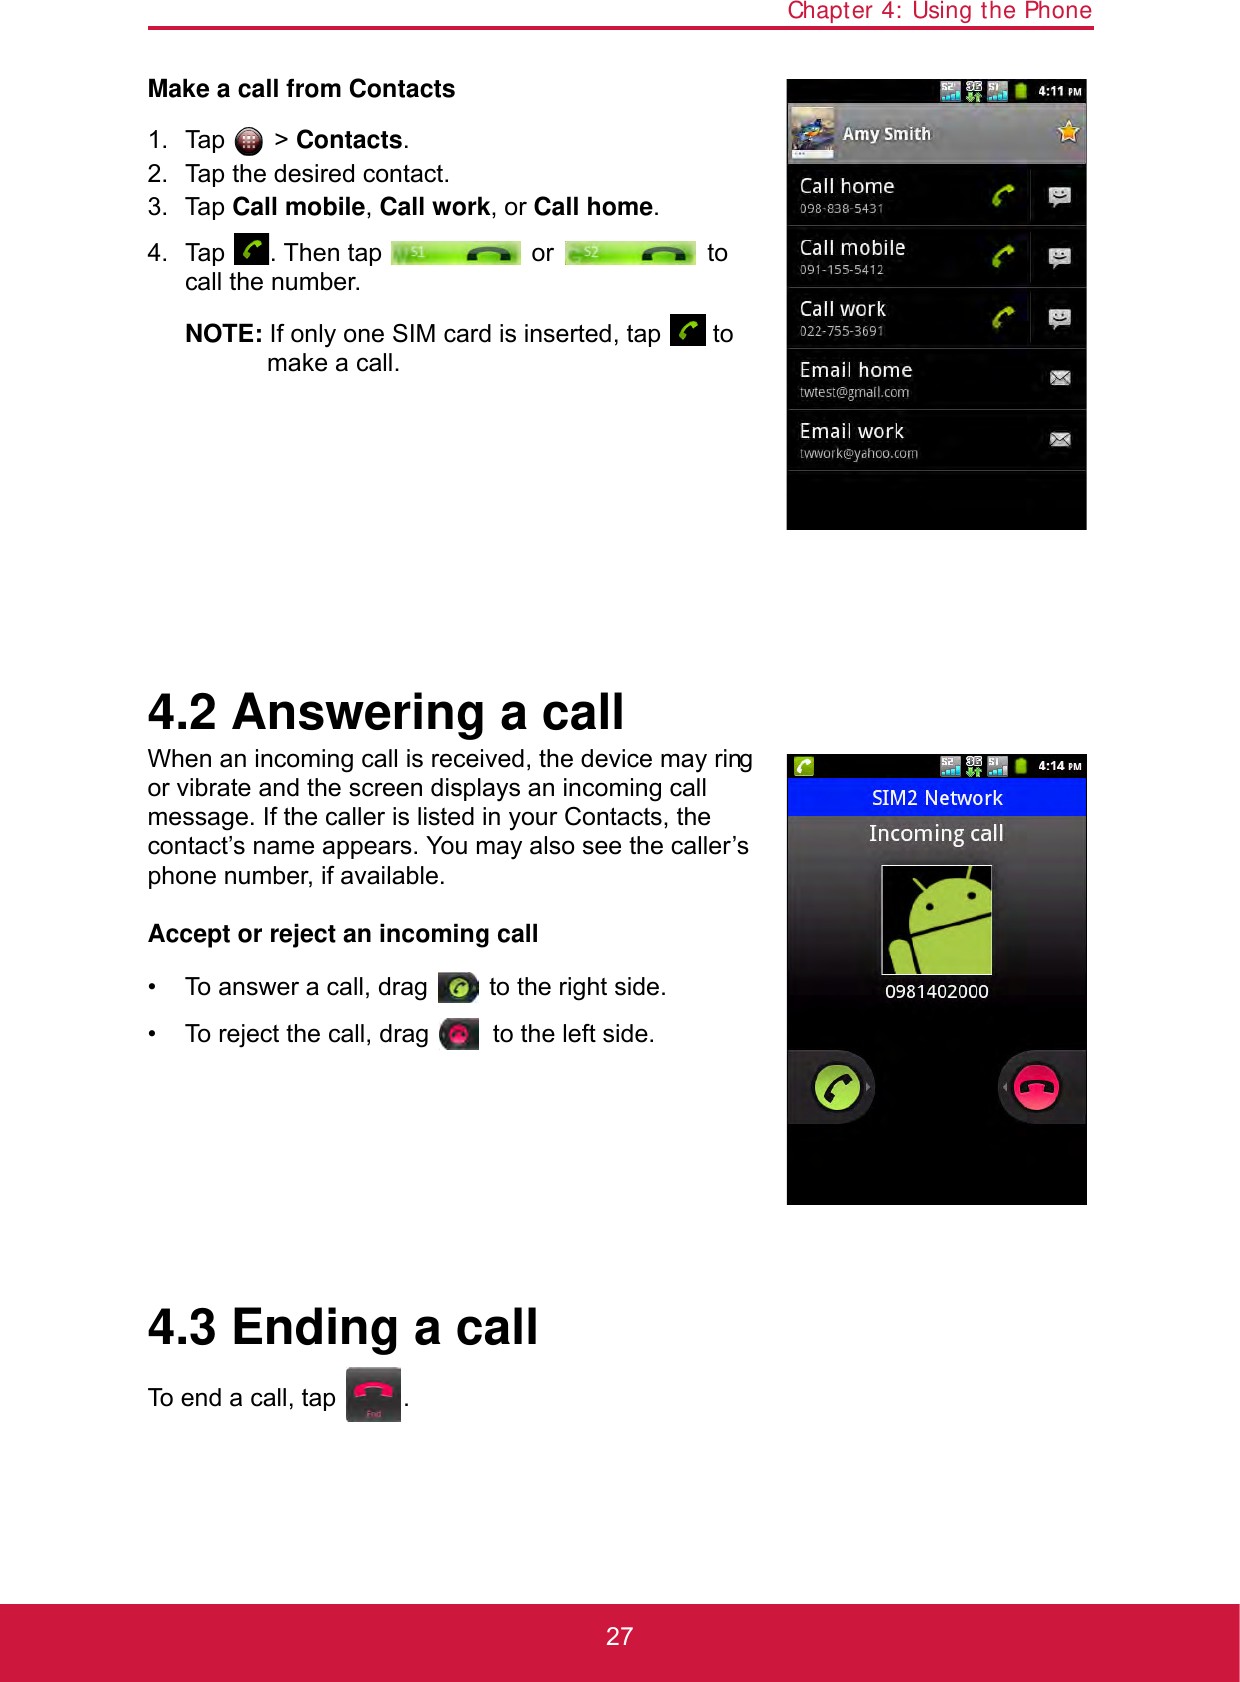 Chapter 4: Using the Phone27Make a call from Contacts1. Tap  &gt; Contacts.2. Tap the desired contact.3. Tap Call mobile, Call work, or Call home.4. Tap  . Then tap   or   to call the number.NOTE: If only one SIM card is inserted, tap   to make a call.4.2 Answering a callWhen an incoming call is received, the device may ring or vibrate and the screen displays an incoming call message. If the caller is listed in your Contacts, the contact’s name appears. You may also see the caller’s phone number, if available.Accept or reject an incoming call• To answer a call, drag   to the right side.• To reject the call, drag   to the left side.4.3 Ending a callTo end a call, tap  .